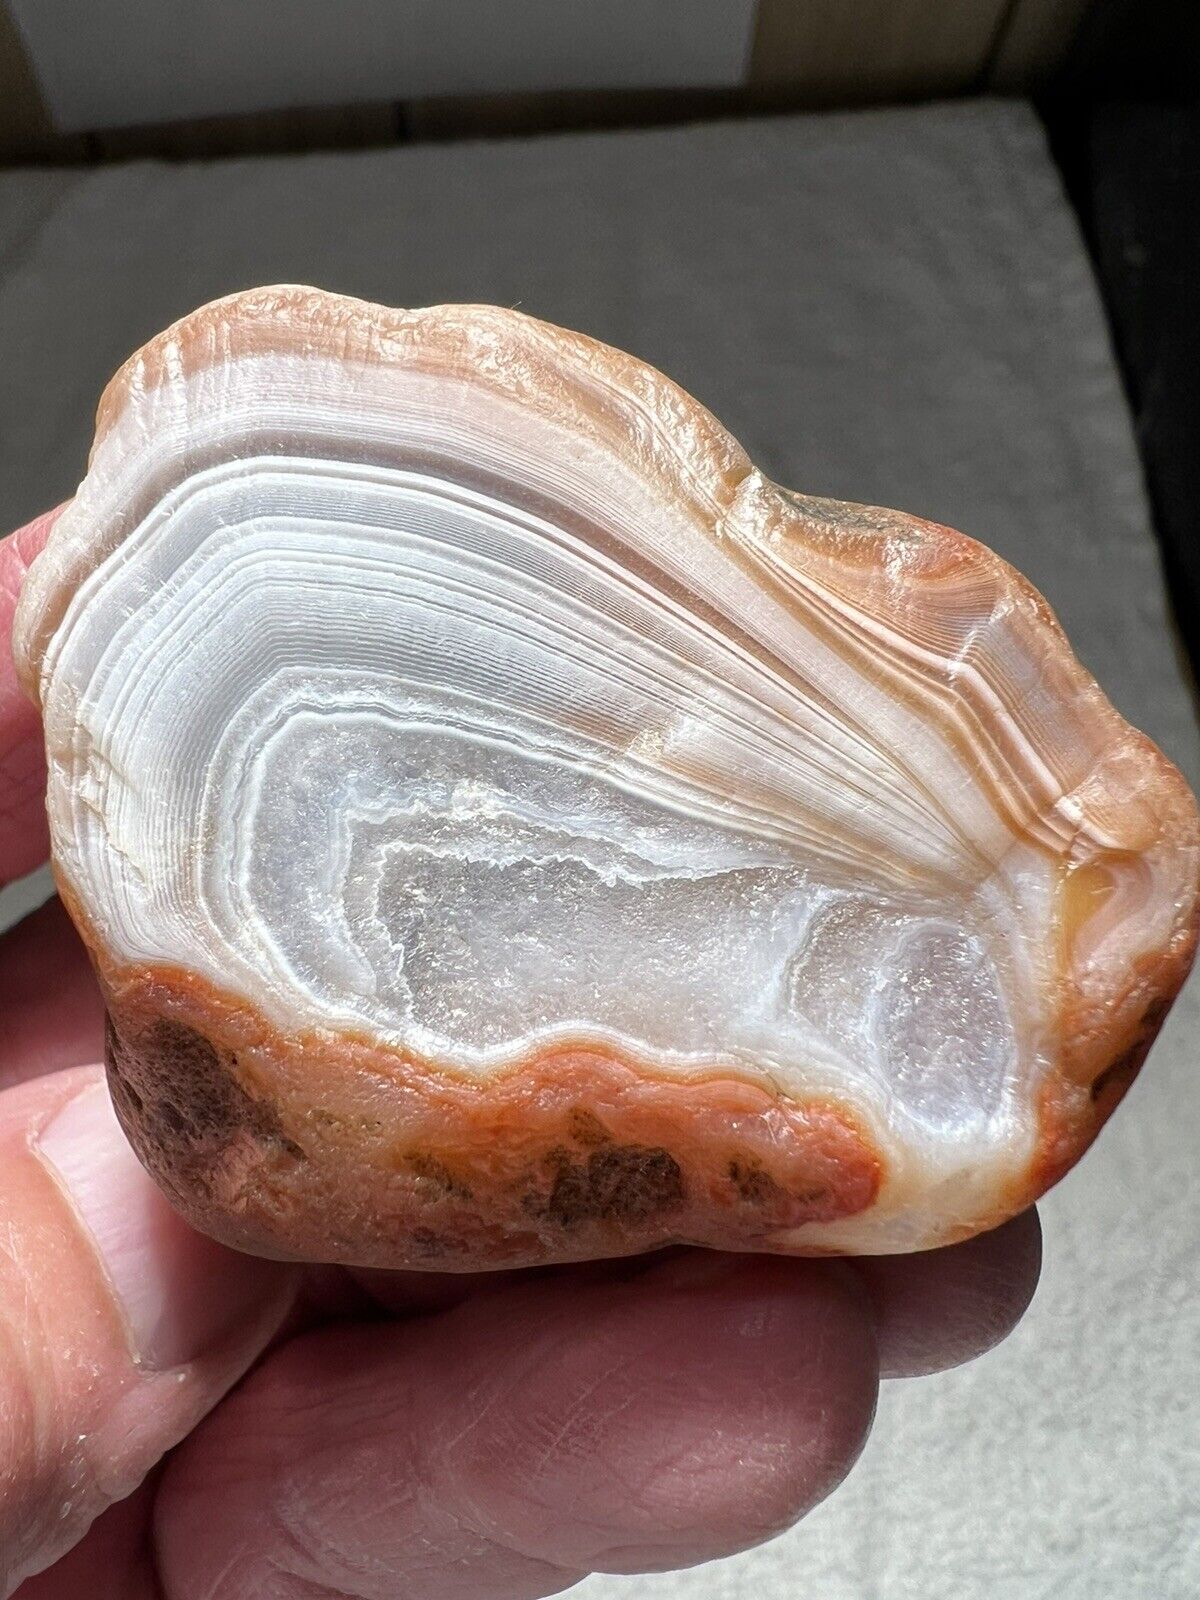 4.23oz  Lake Superior Agate with Stunning Sunbleached High Contrast Banding